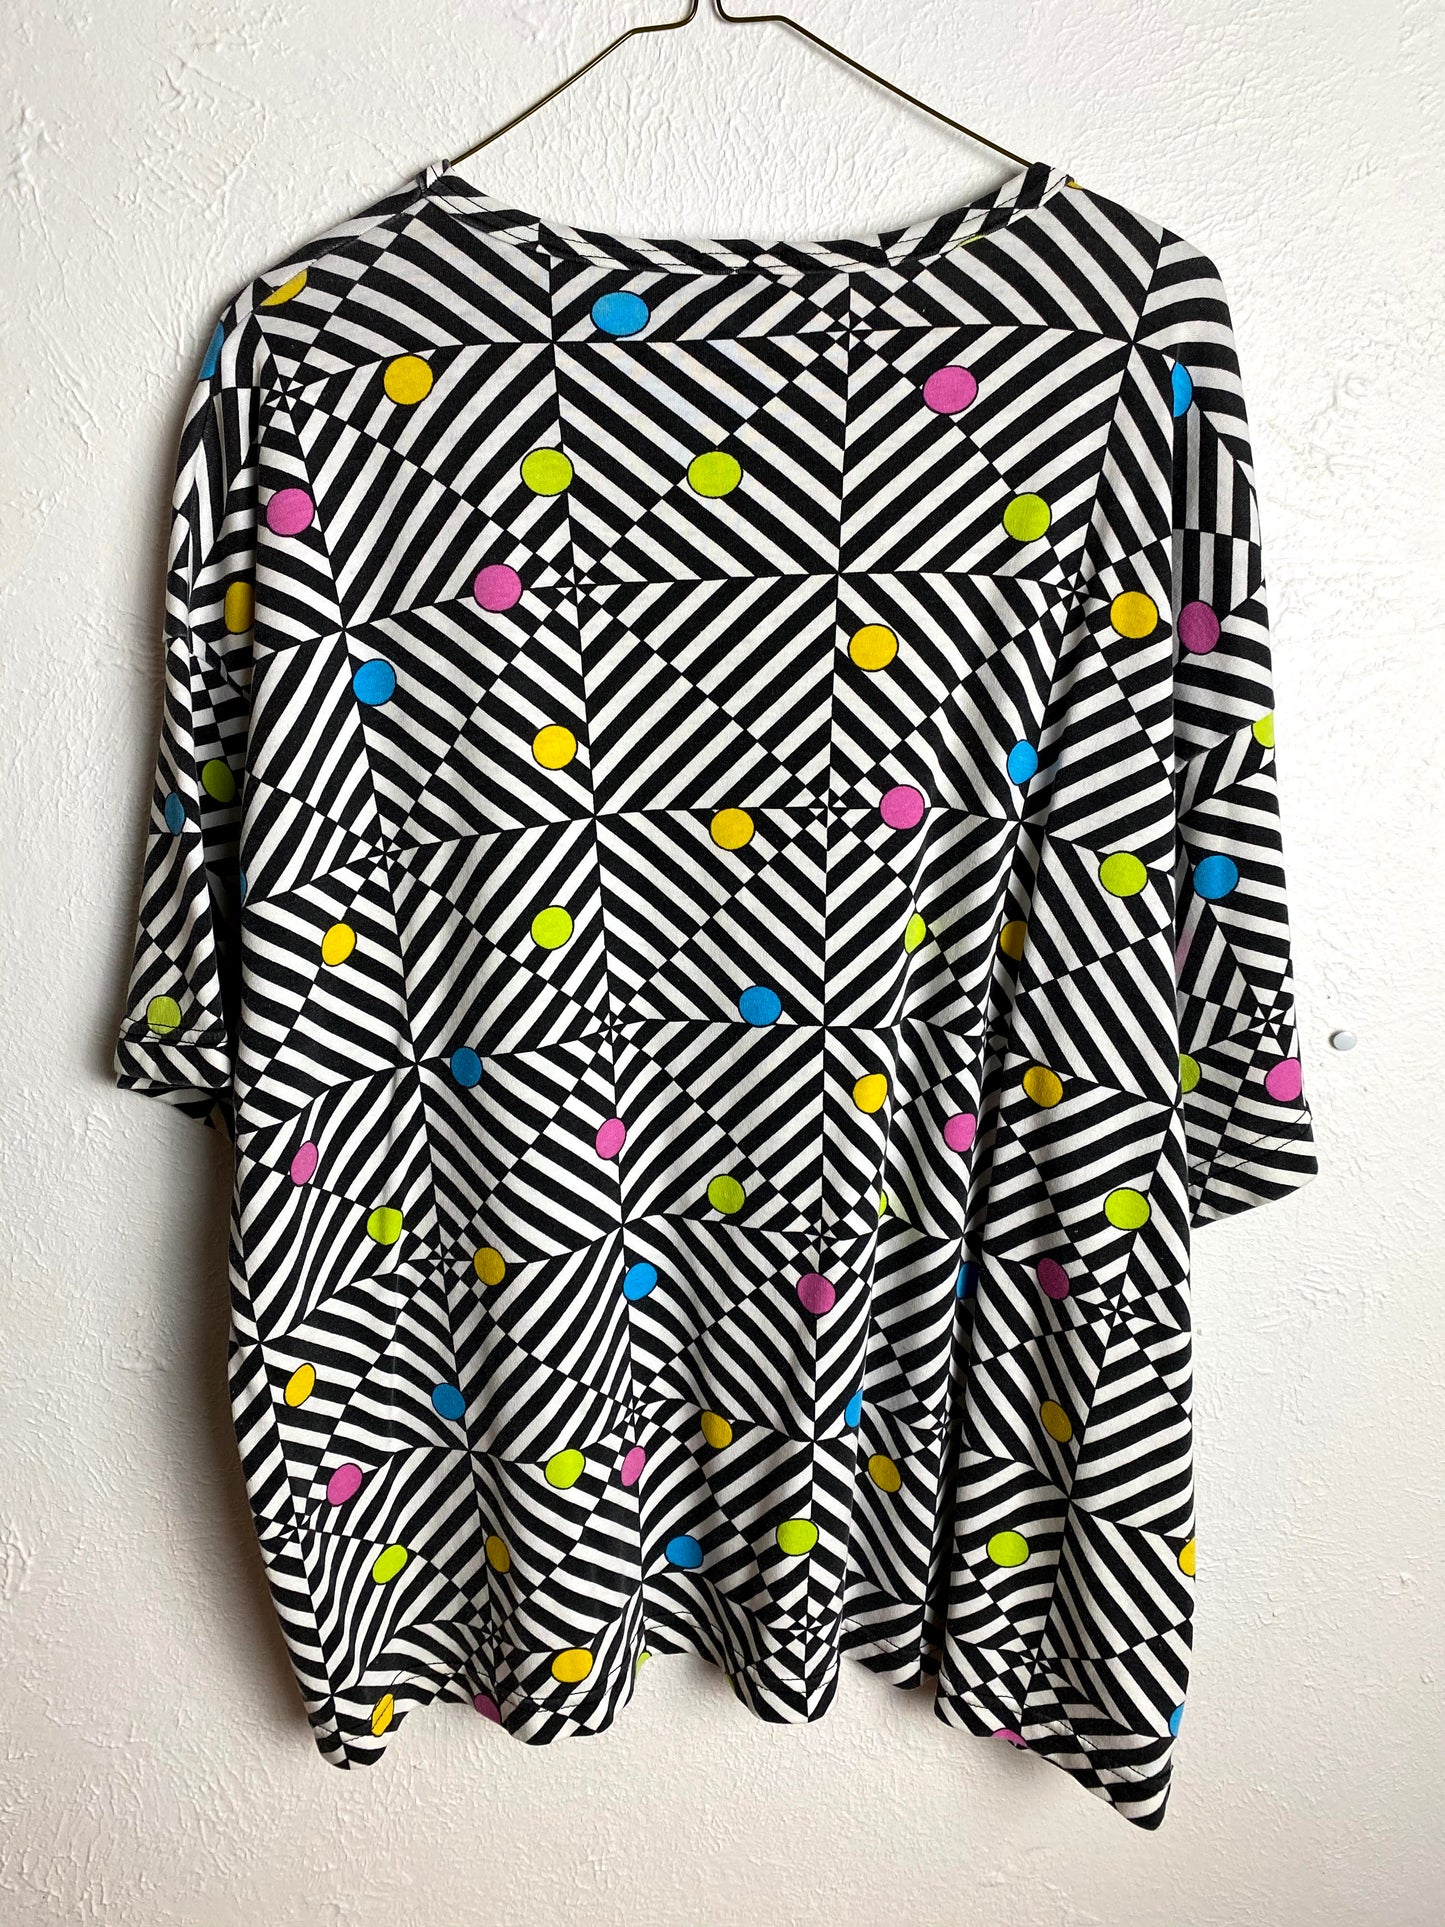 80's Mooncraft Trippy Striped Shirt